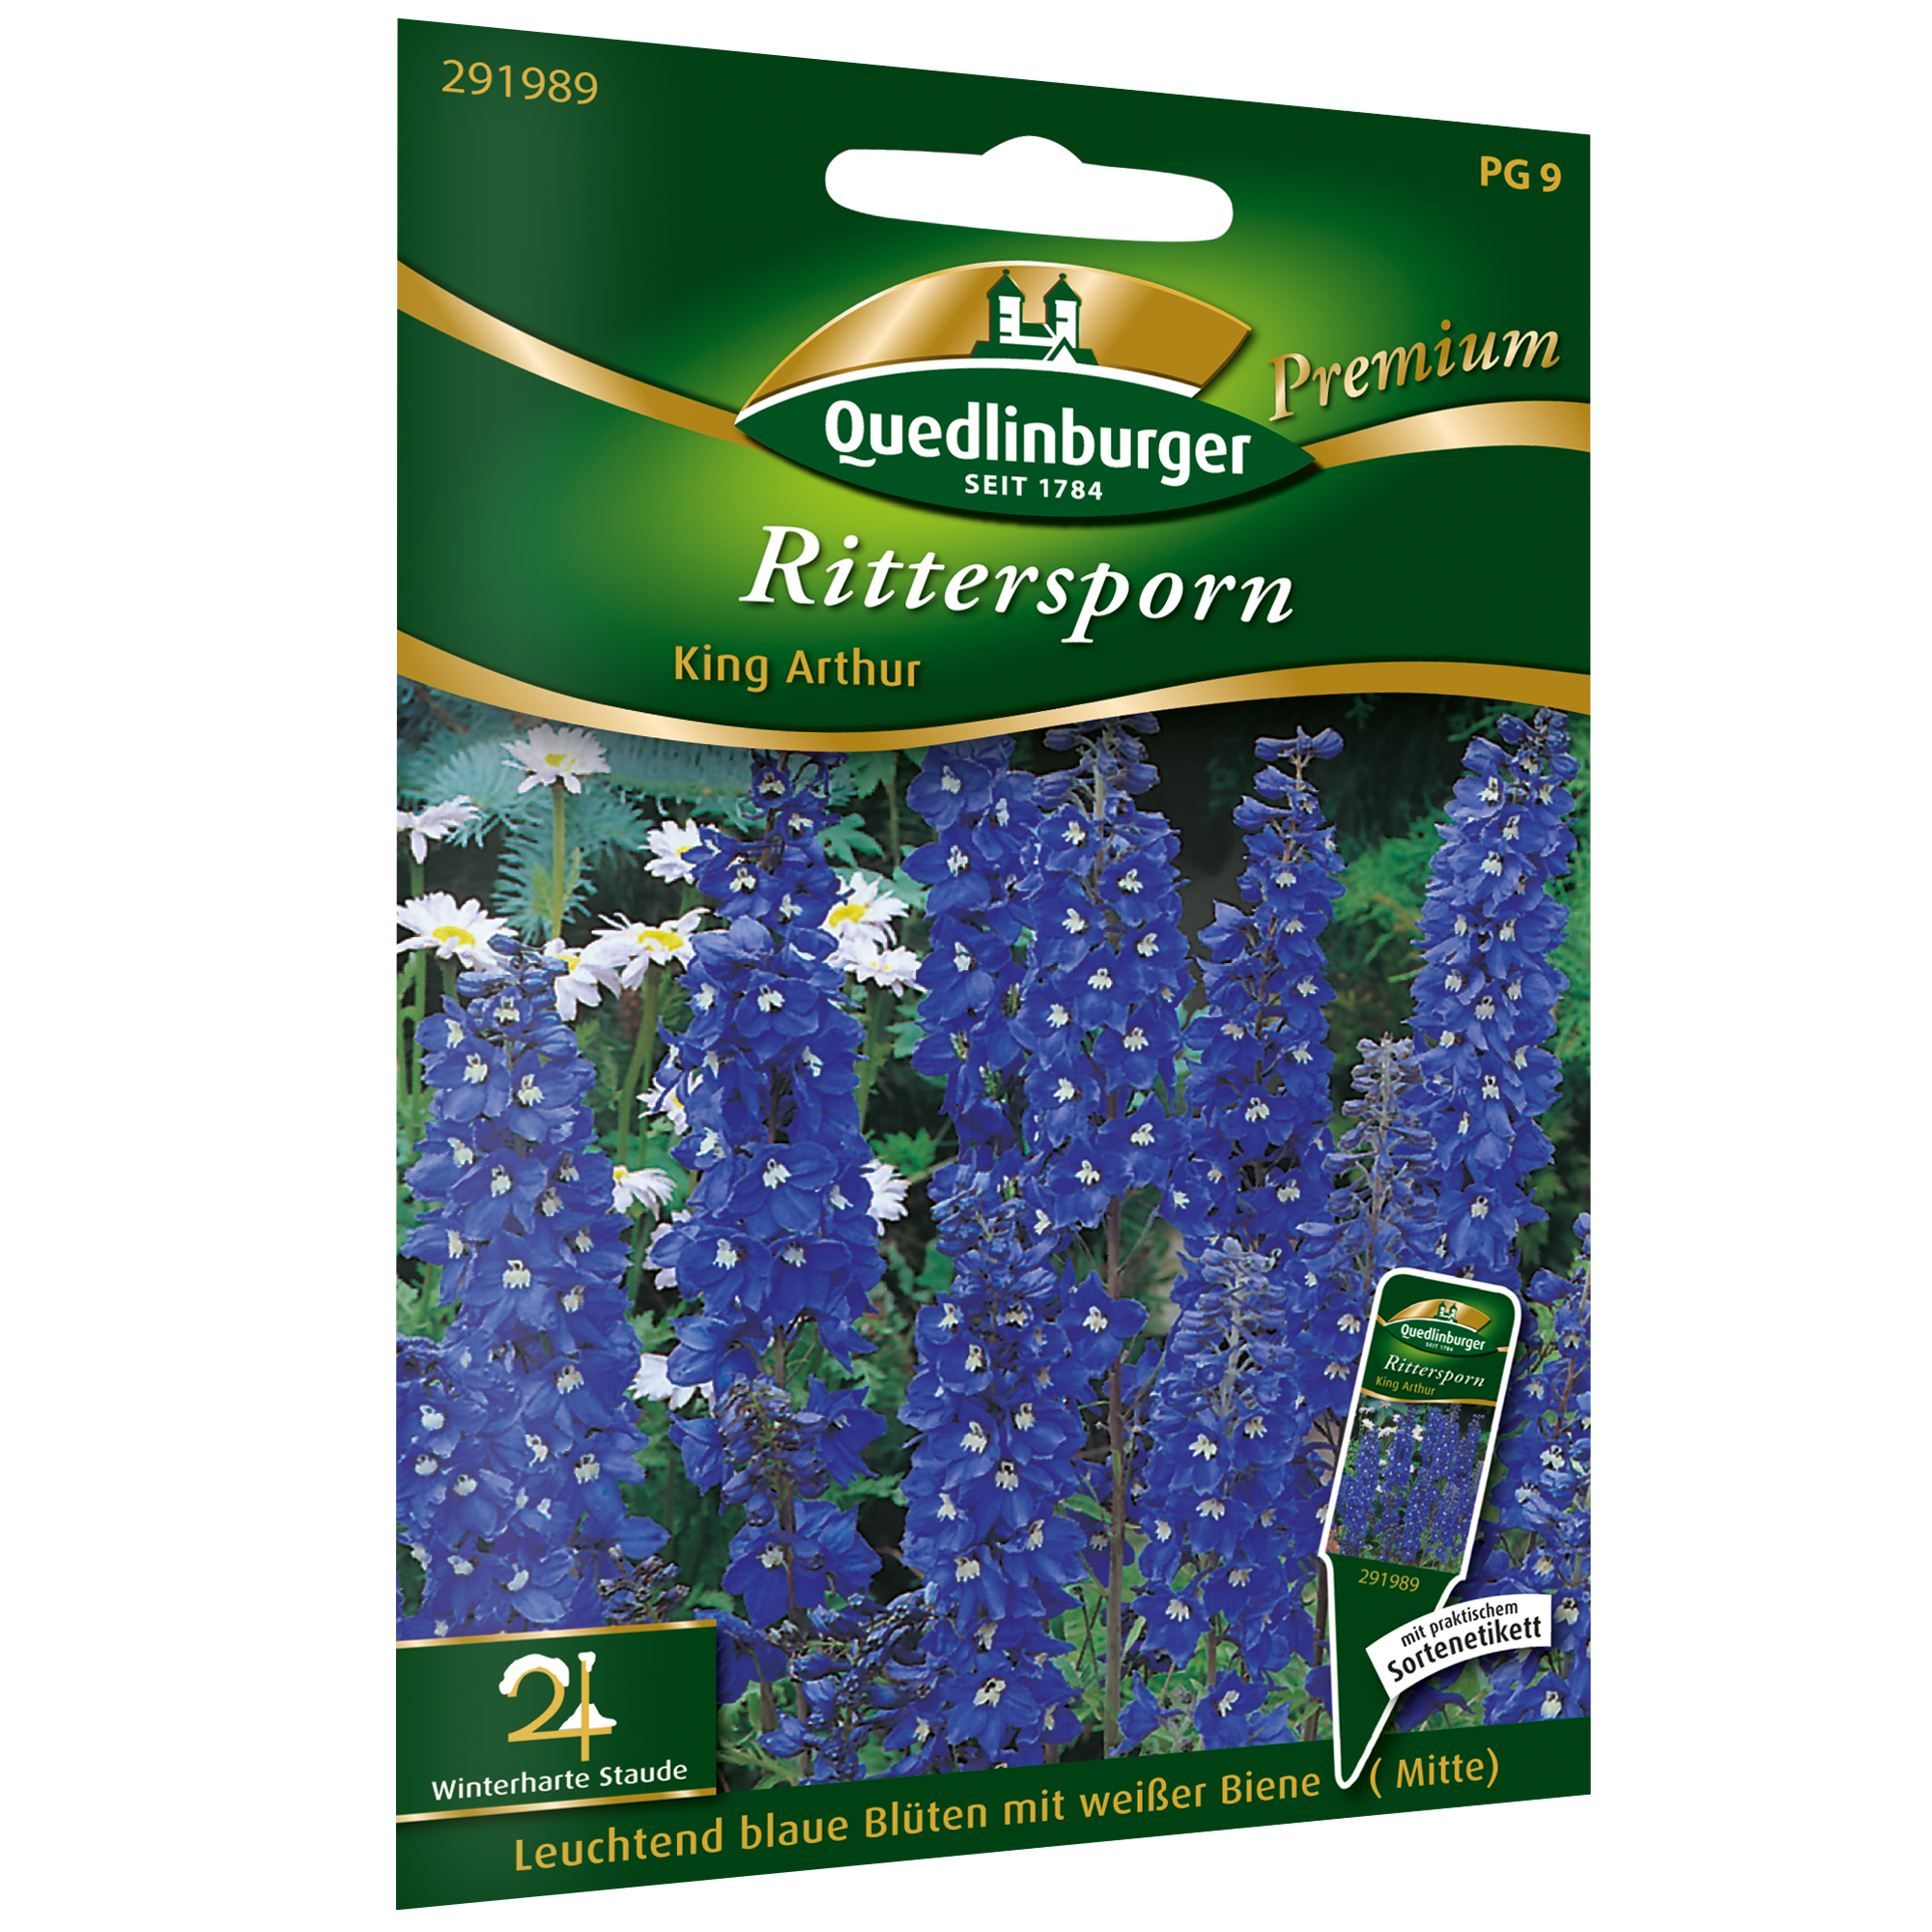 Rittersporn 'King Arthur' + product picture